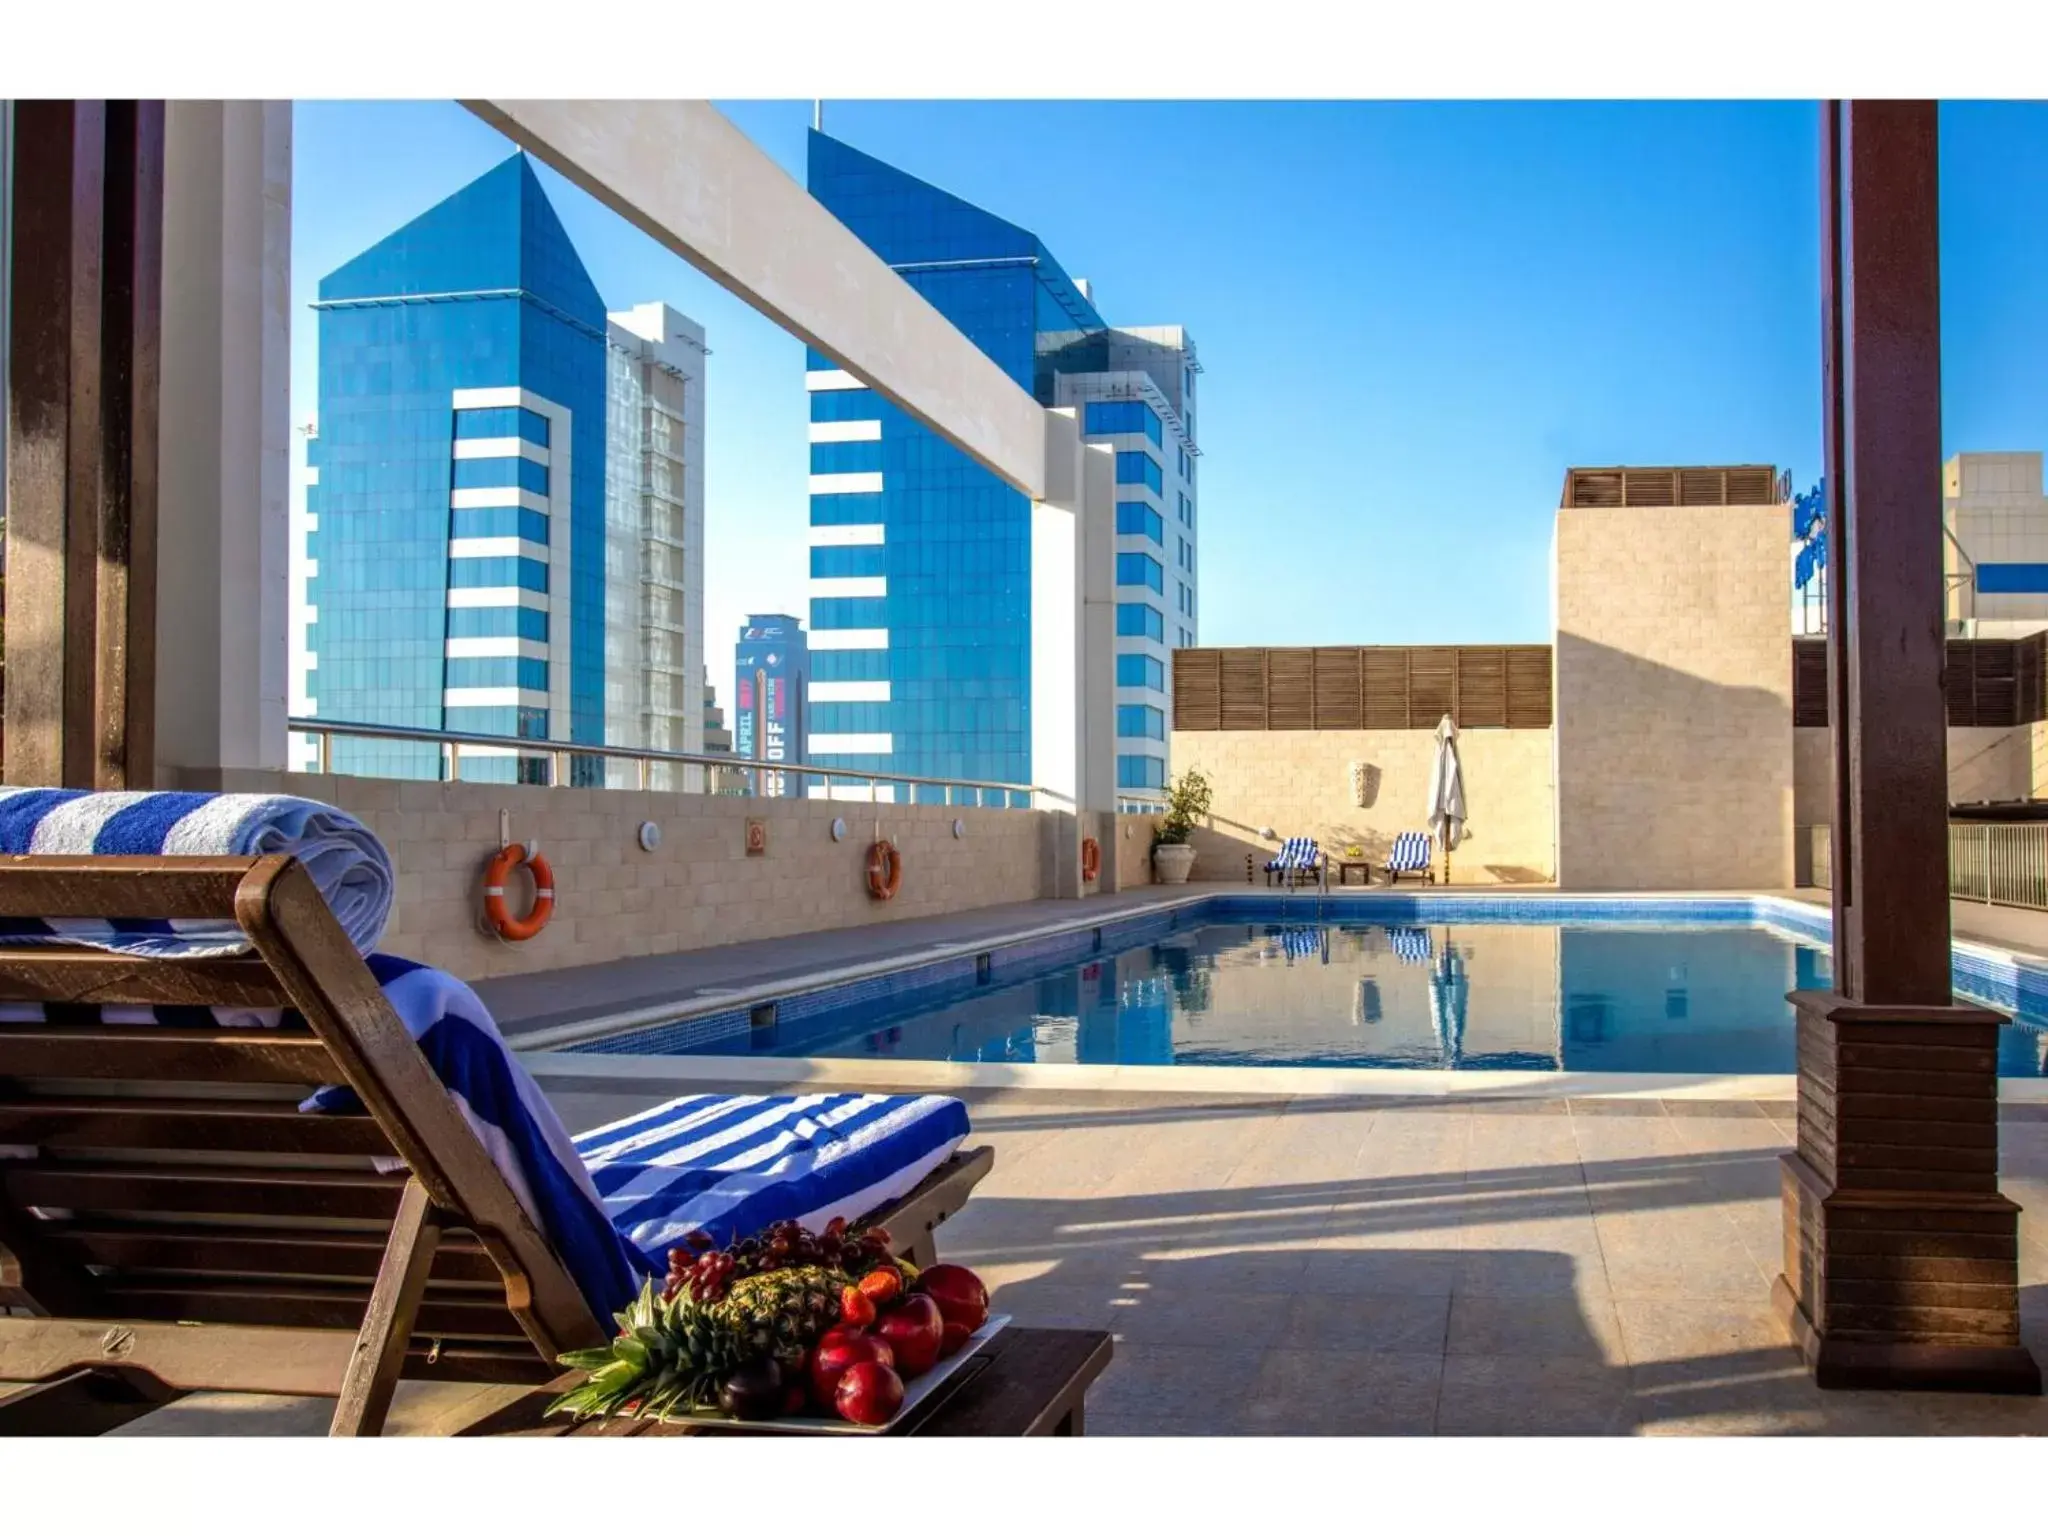 Swimming Pool in Gulf Court Hotel